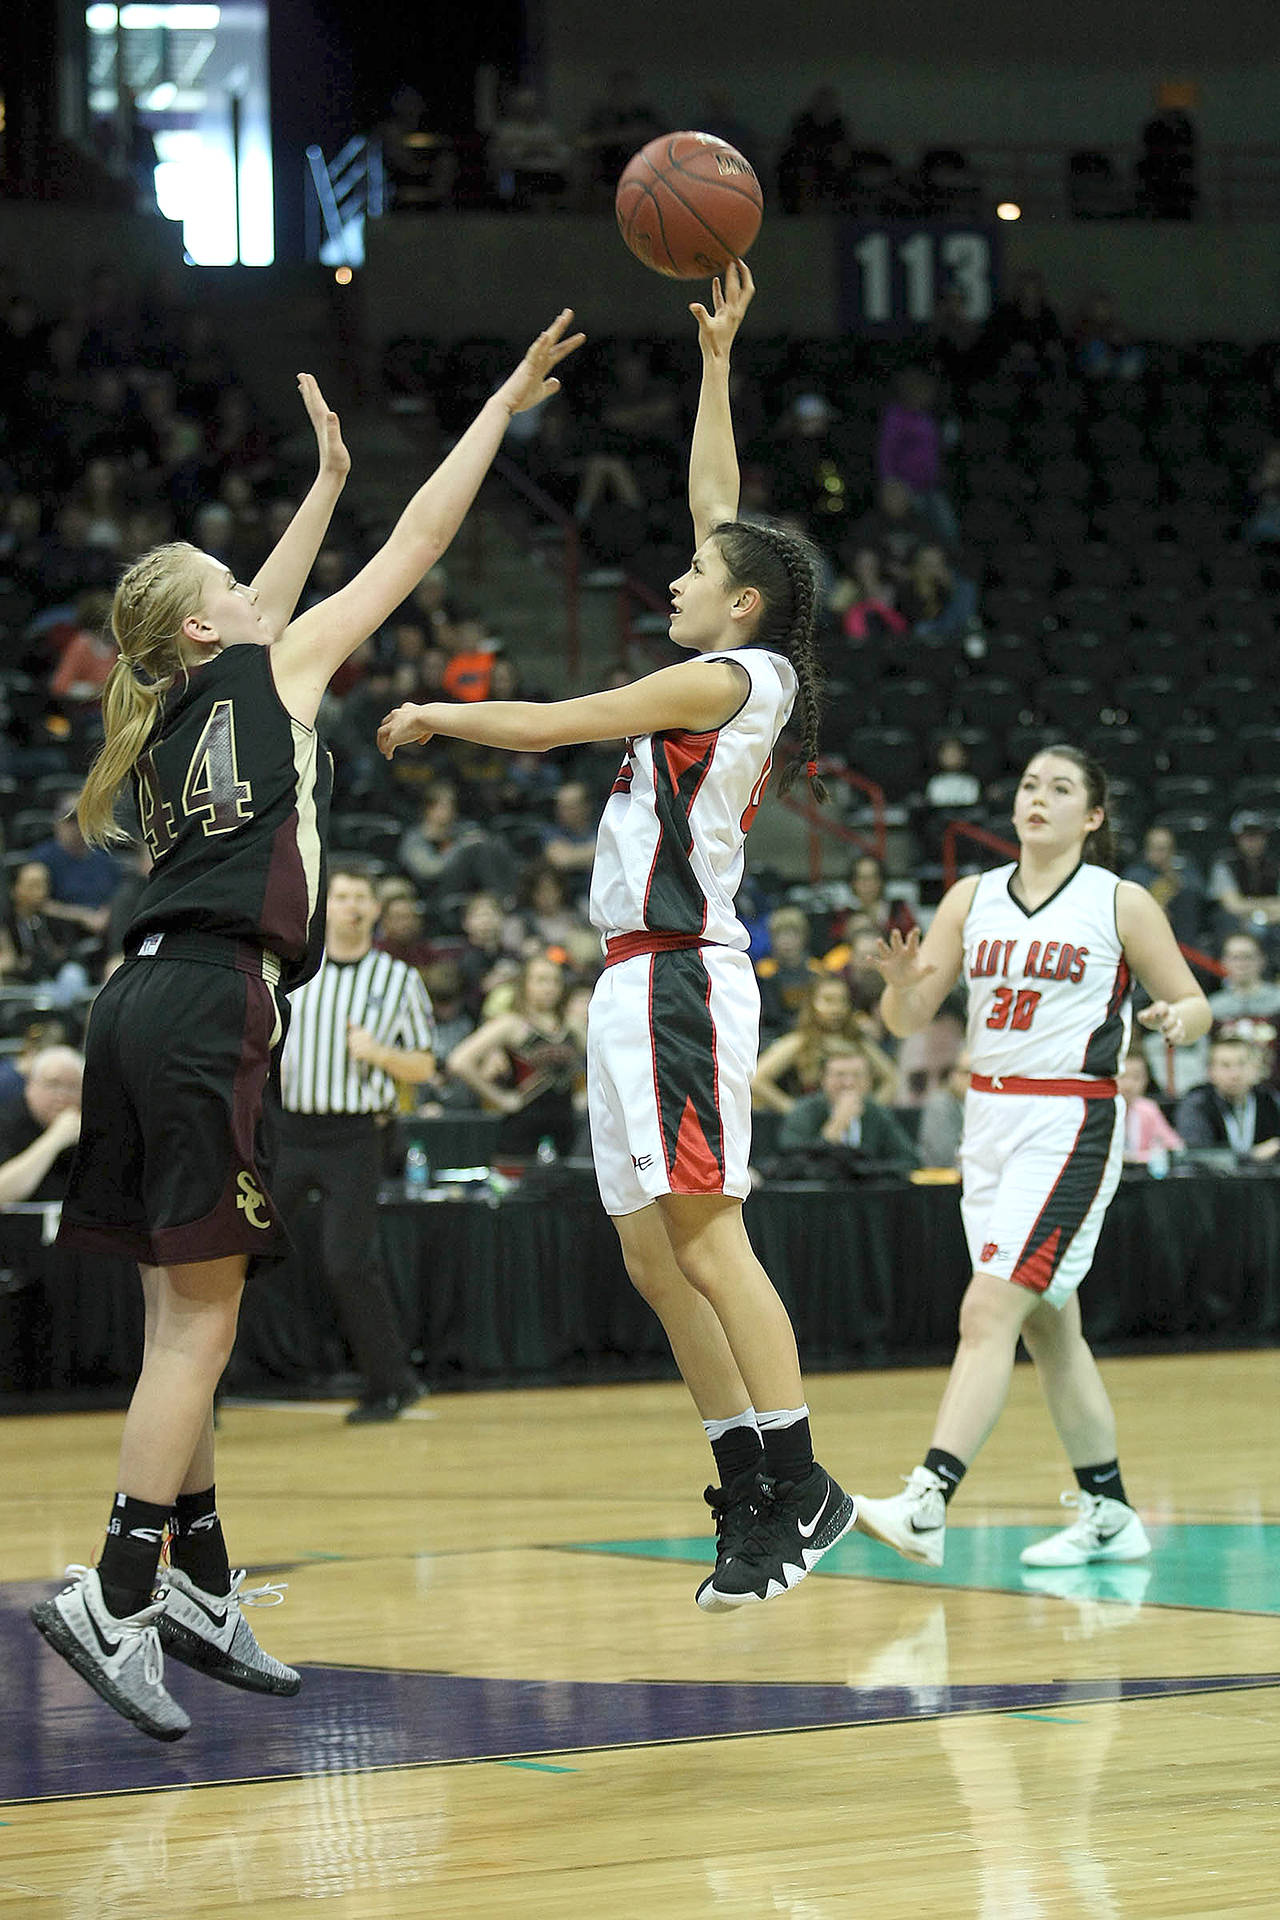 David Willoughby Neah Bay’s Laila Greene shoots over a Sunnyside Christian defender during the Class 1B Girls Basketball State Tournament last season at Spokane Arena.